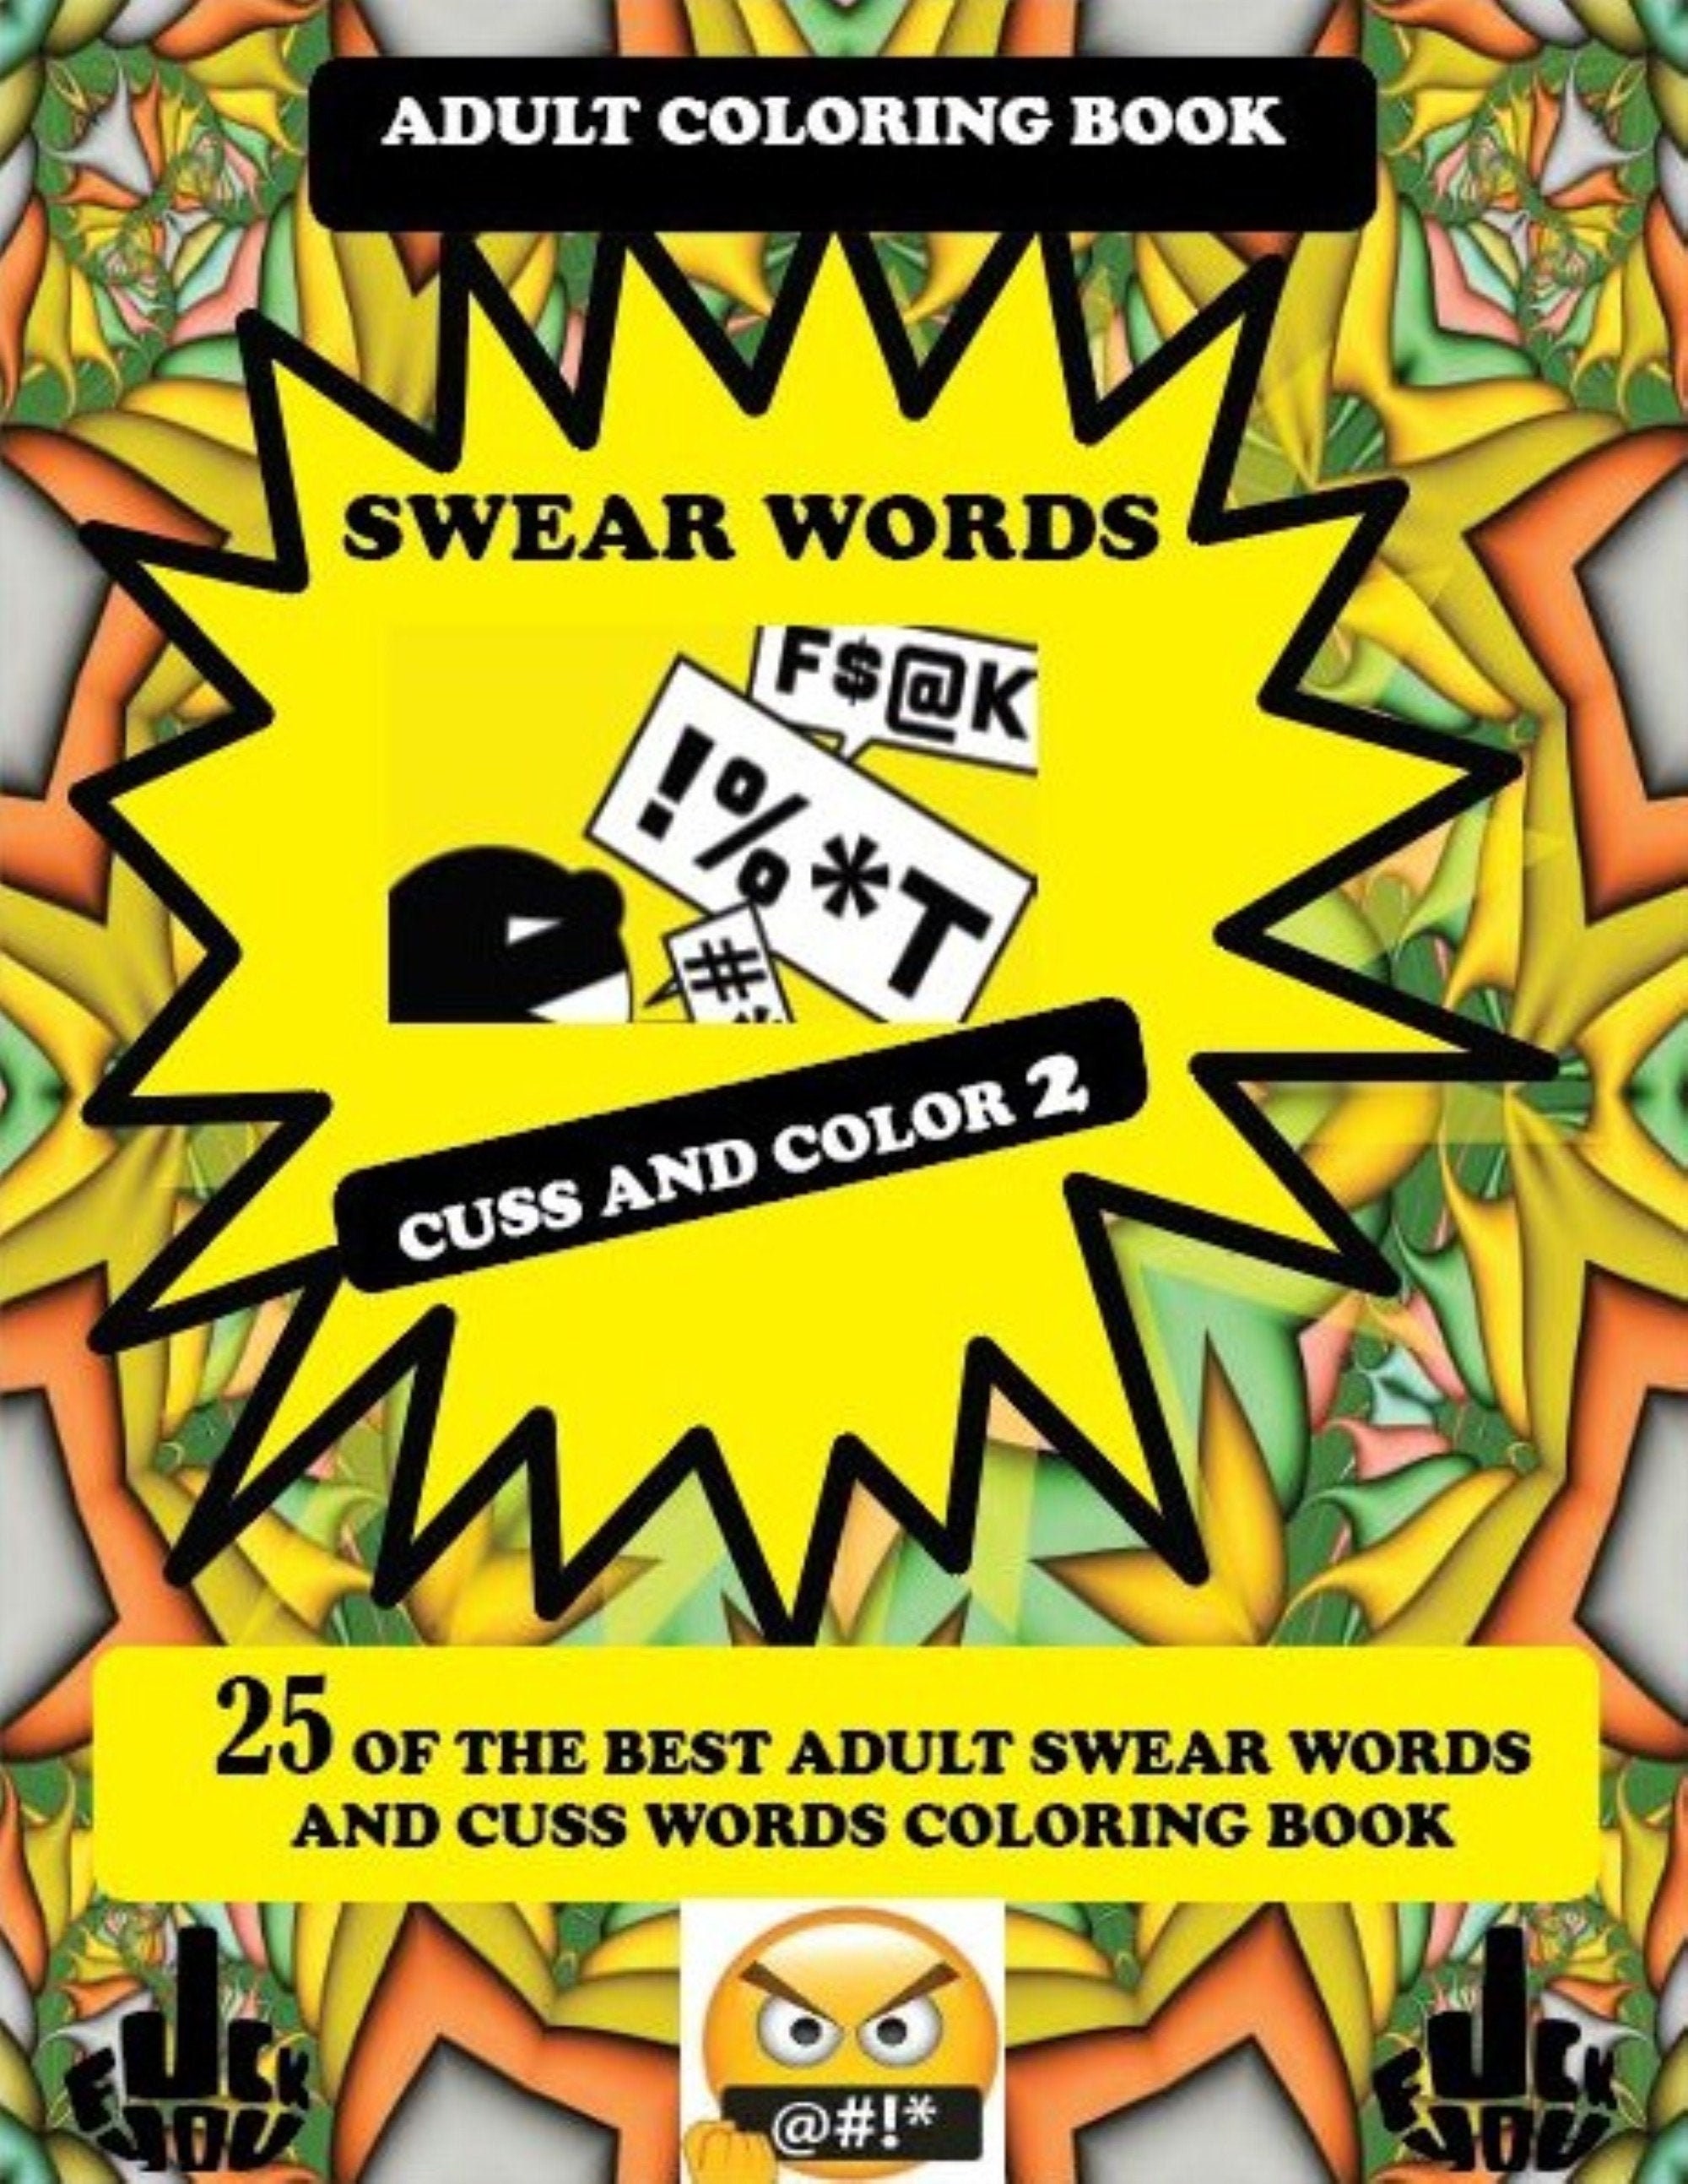 Maybe Swearing Will Help Adult Coloring Book Set - Coloring Books for Adults  Relaxation with 30 Markers in a Case - Motivational Swear Word Anxiety  Relief - Color Cuss & Laugh Your